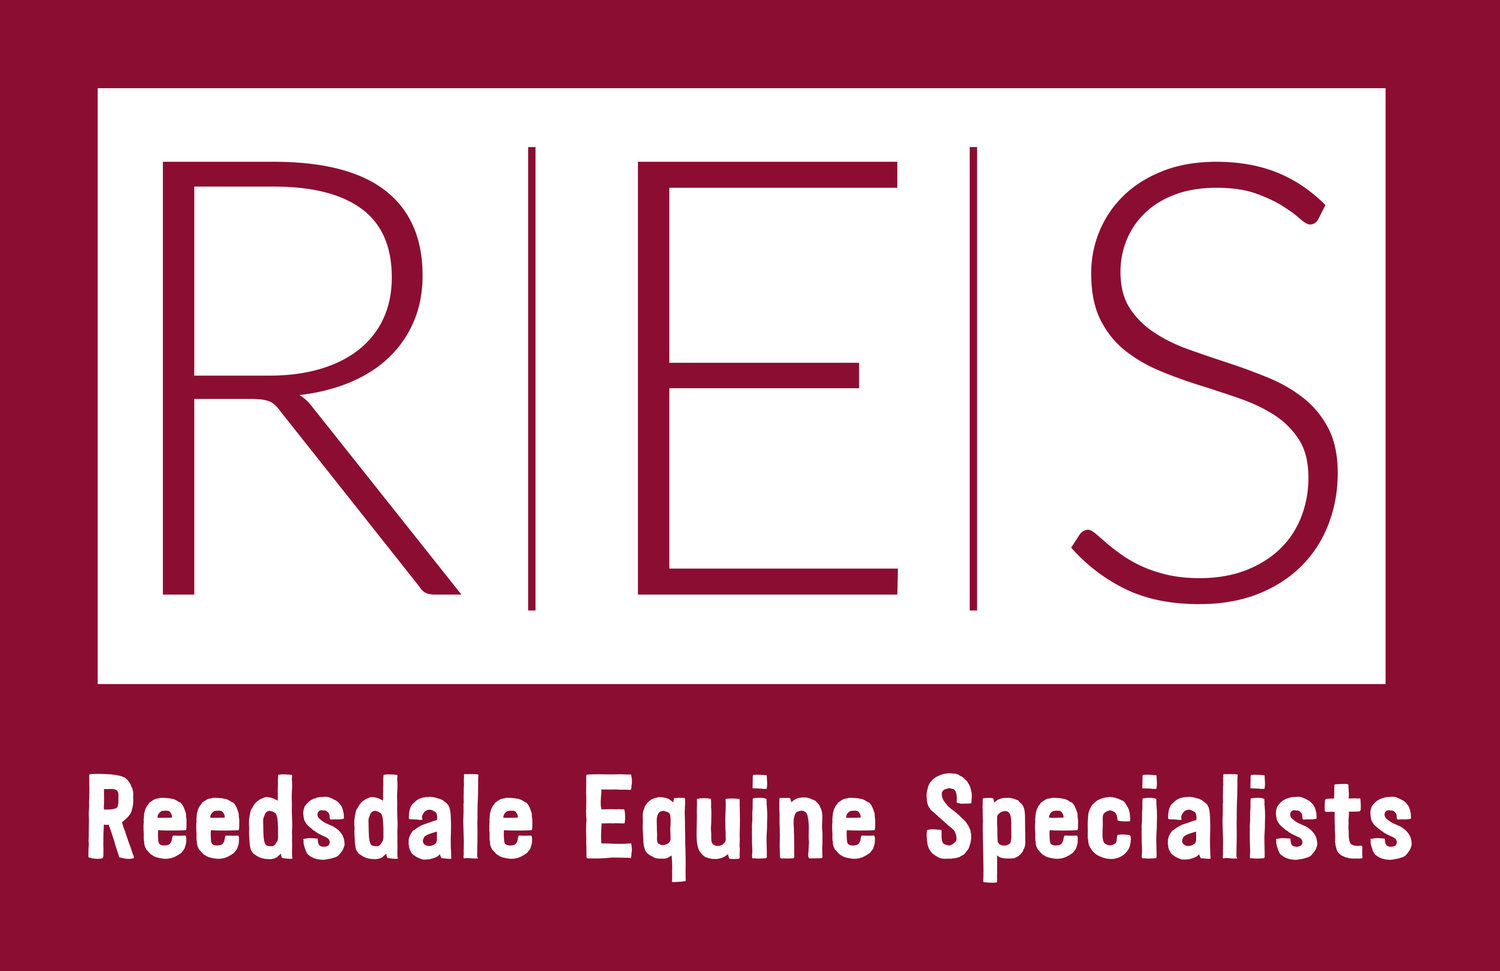 Reedsdale Equine Specialists